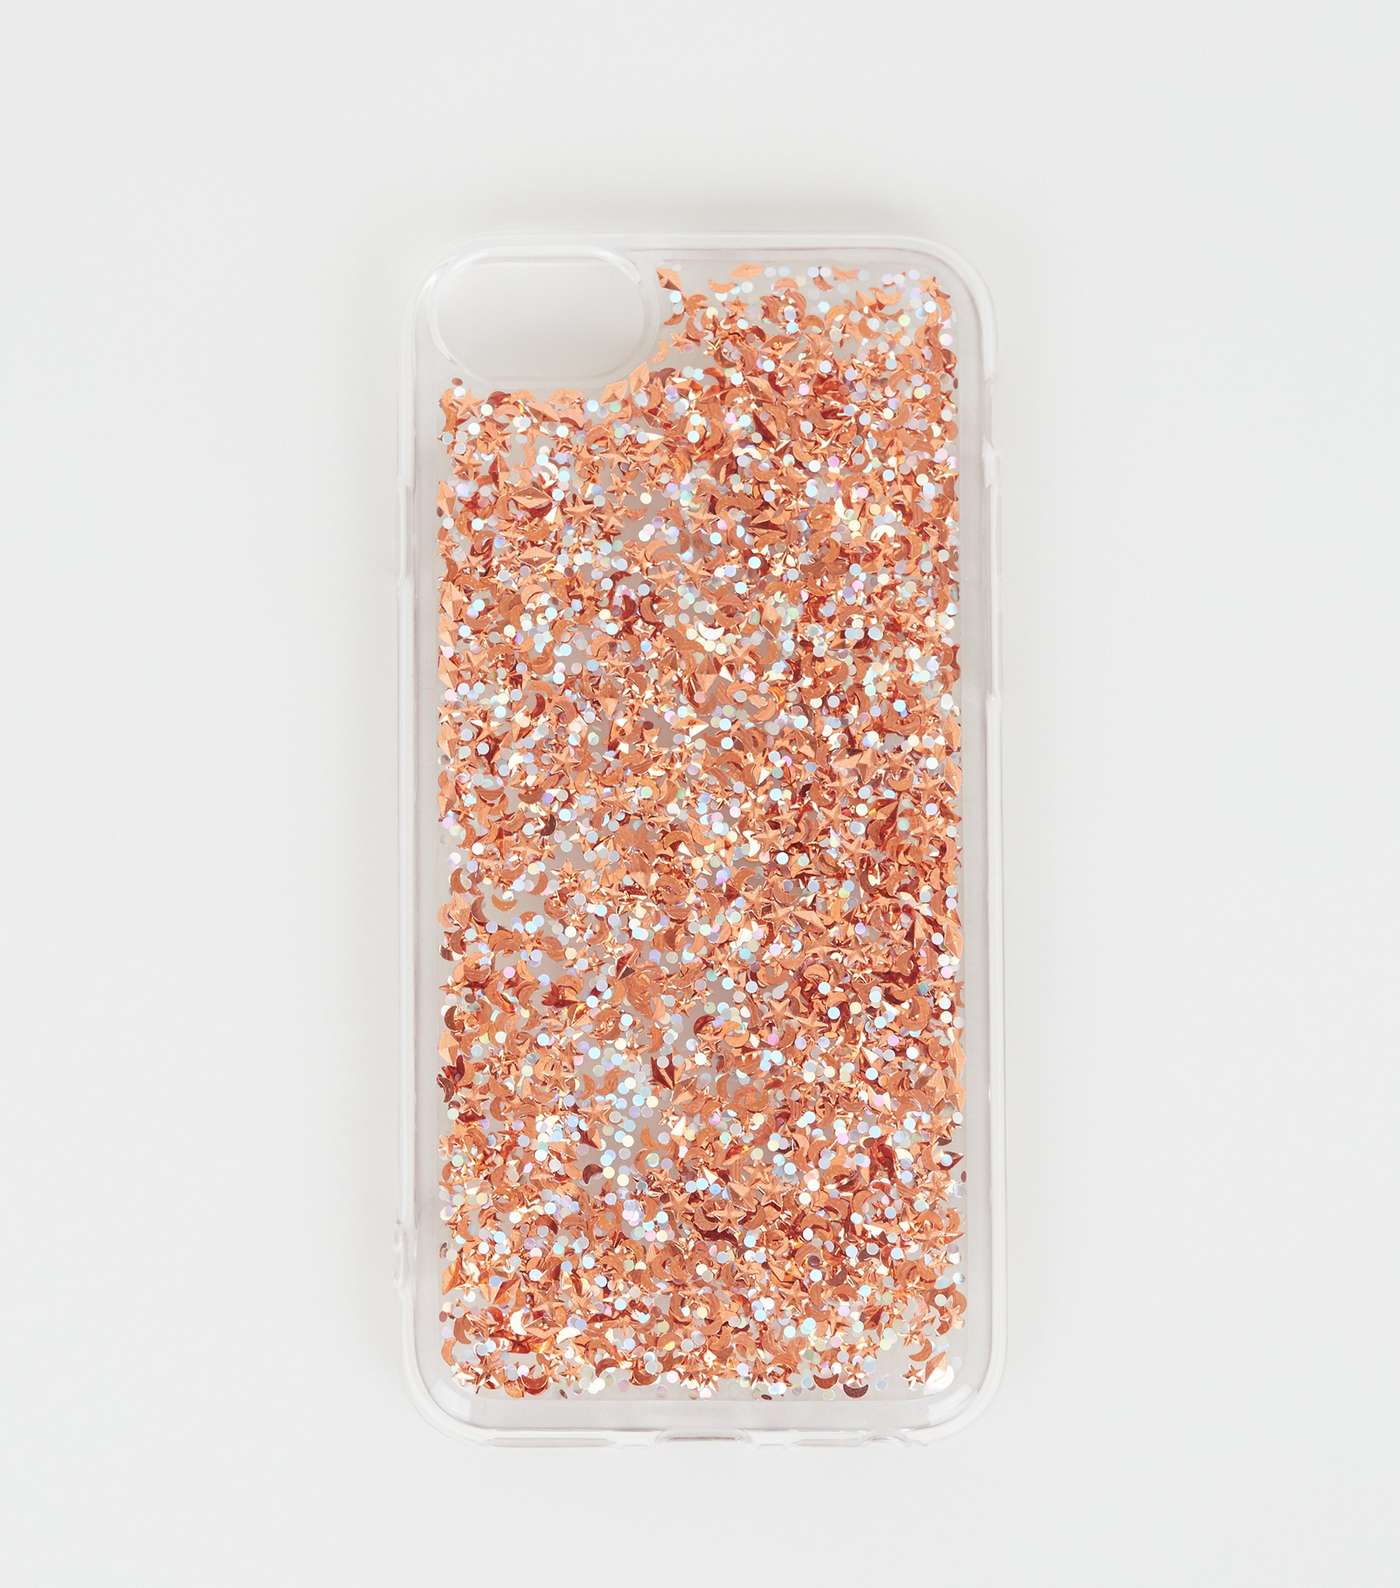 Rose Gold and Silver Glitter Case for iPhone 6/6s/7/8